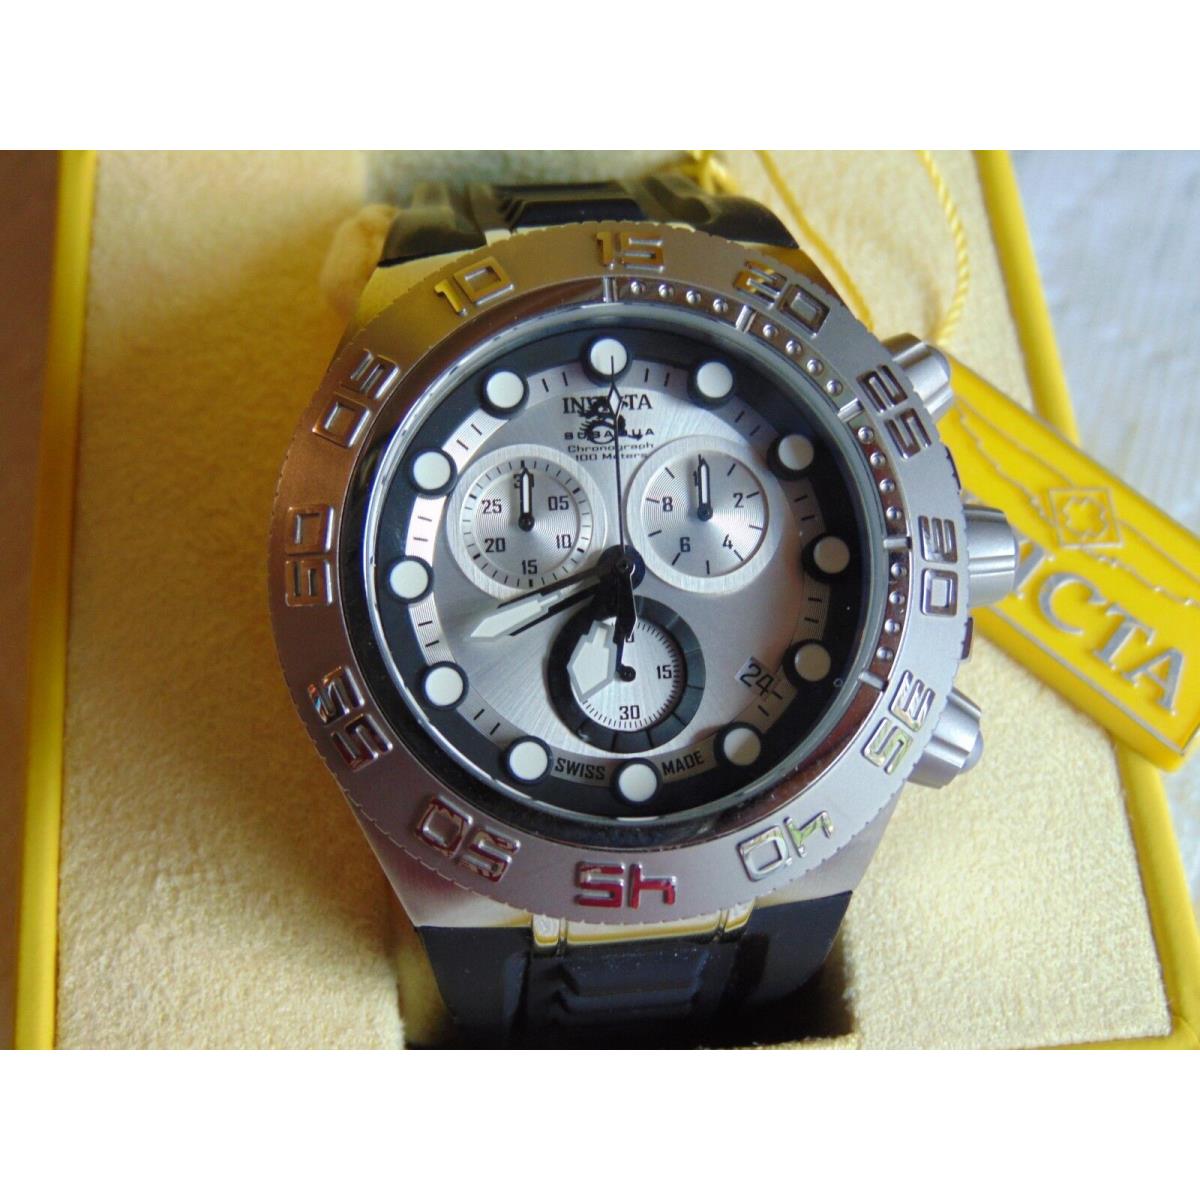 Invicta 50mm Subaqua Sport Chronograph Swiss Made Watch with Silicone Strap